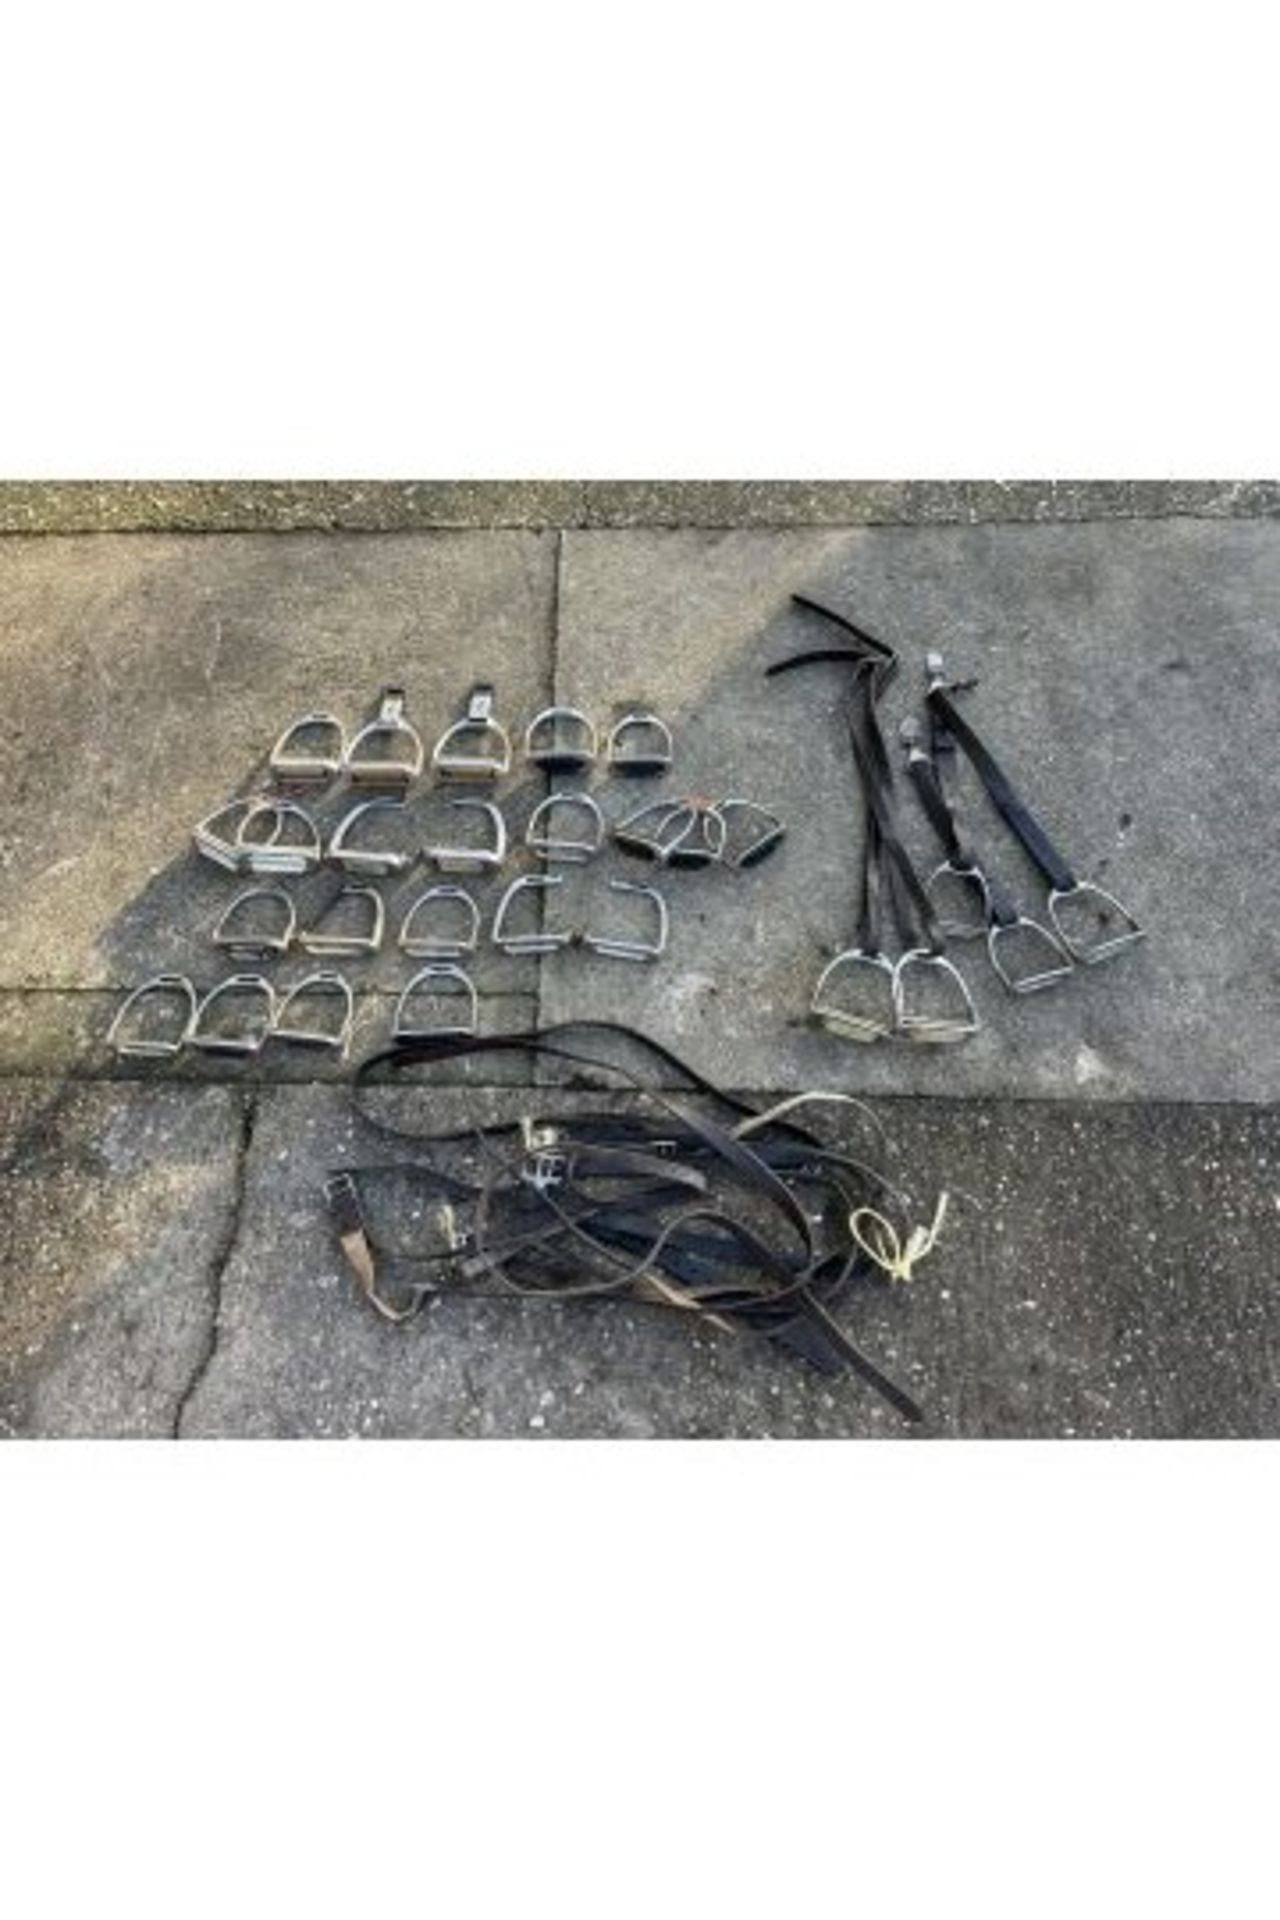 Quantity of stirrup irons and leathers